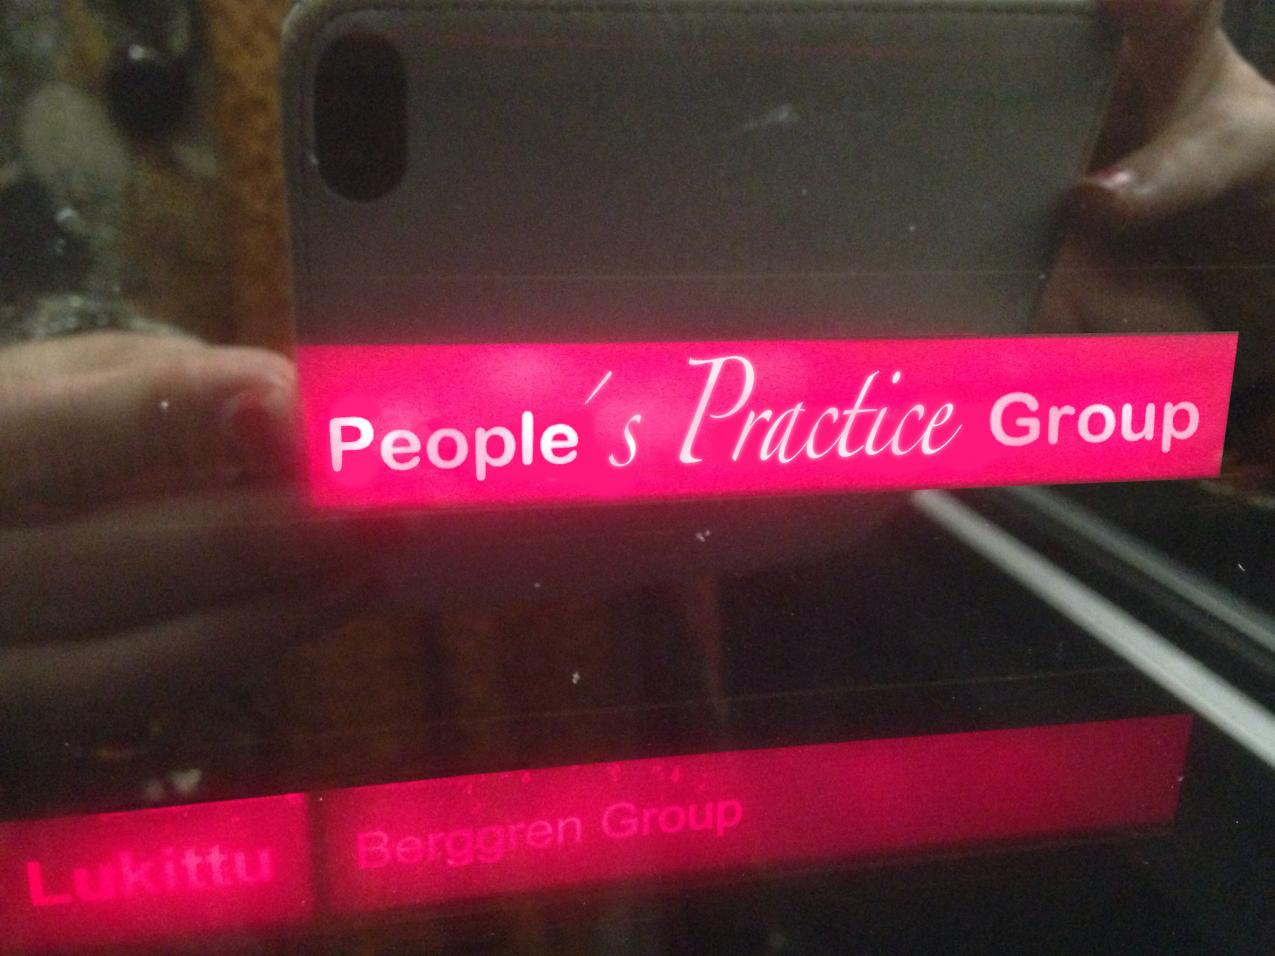 People's Practice Group logo